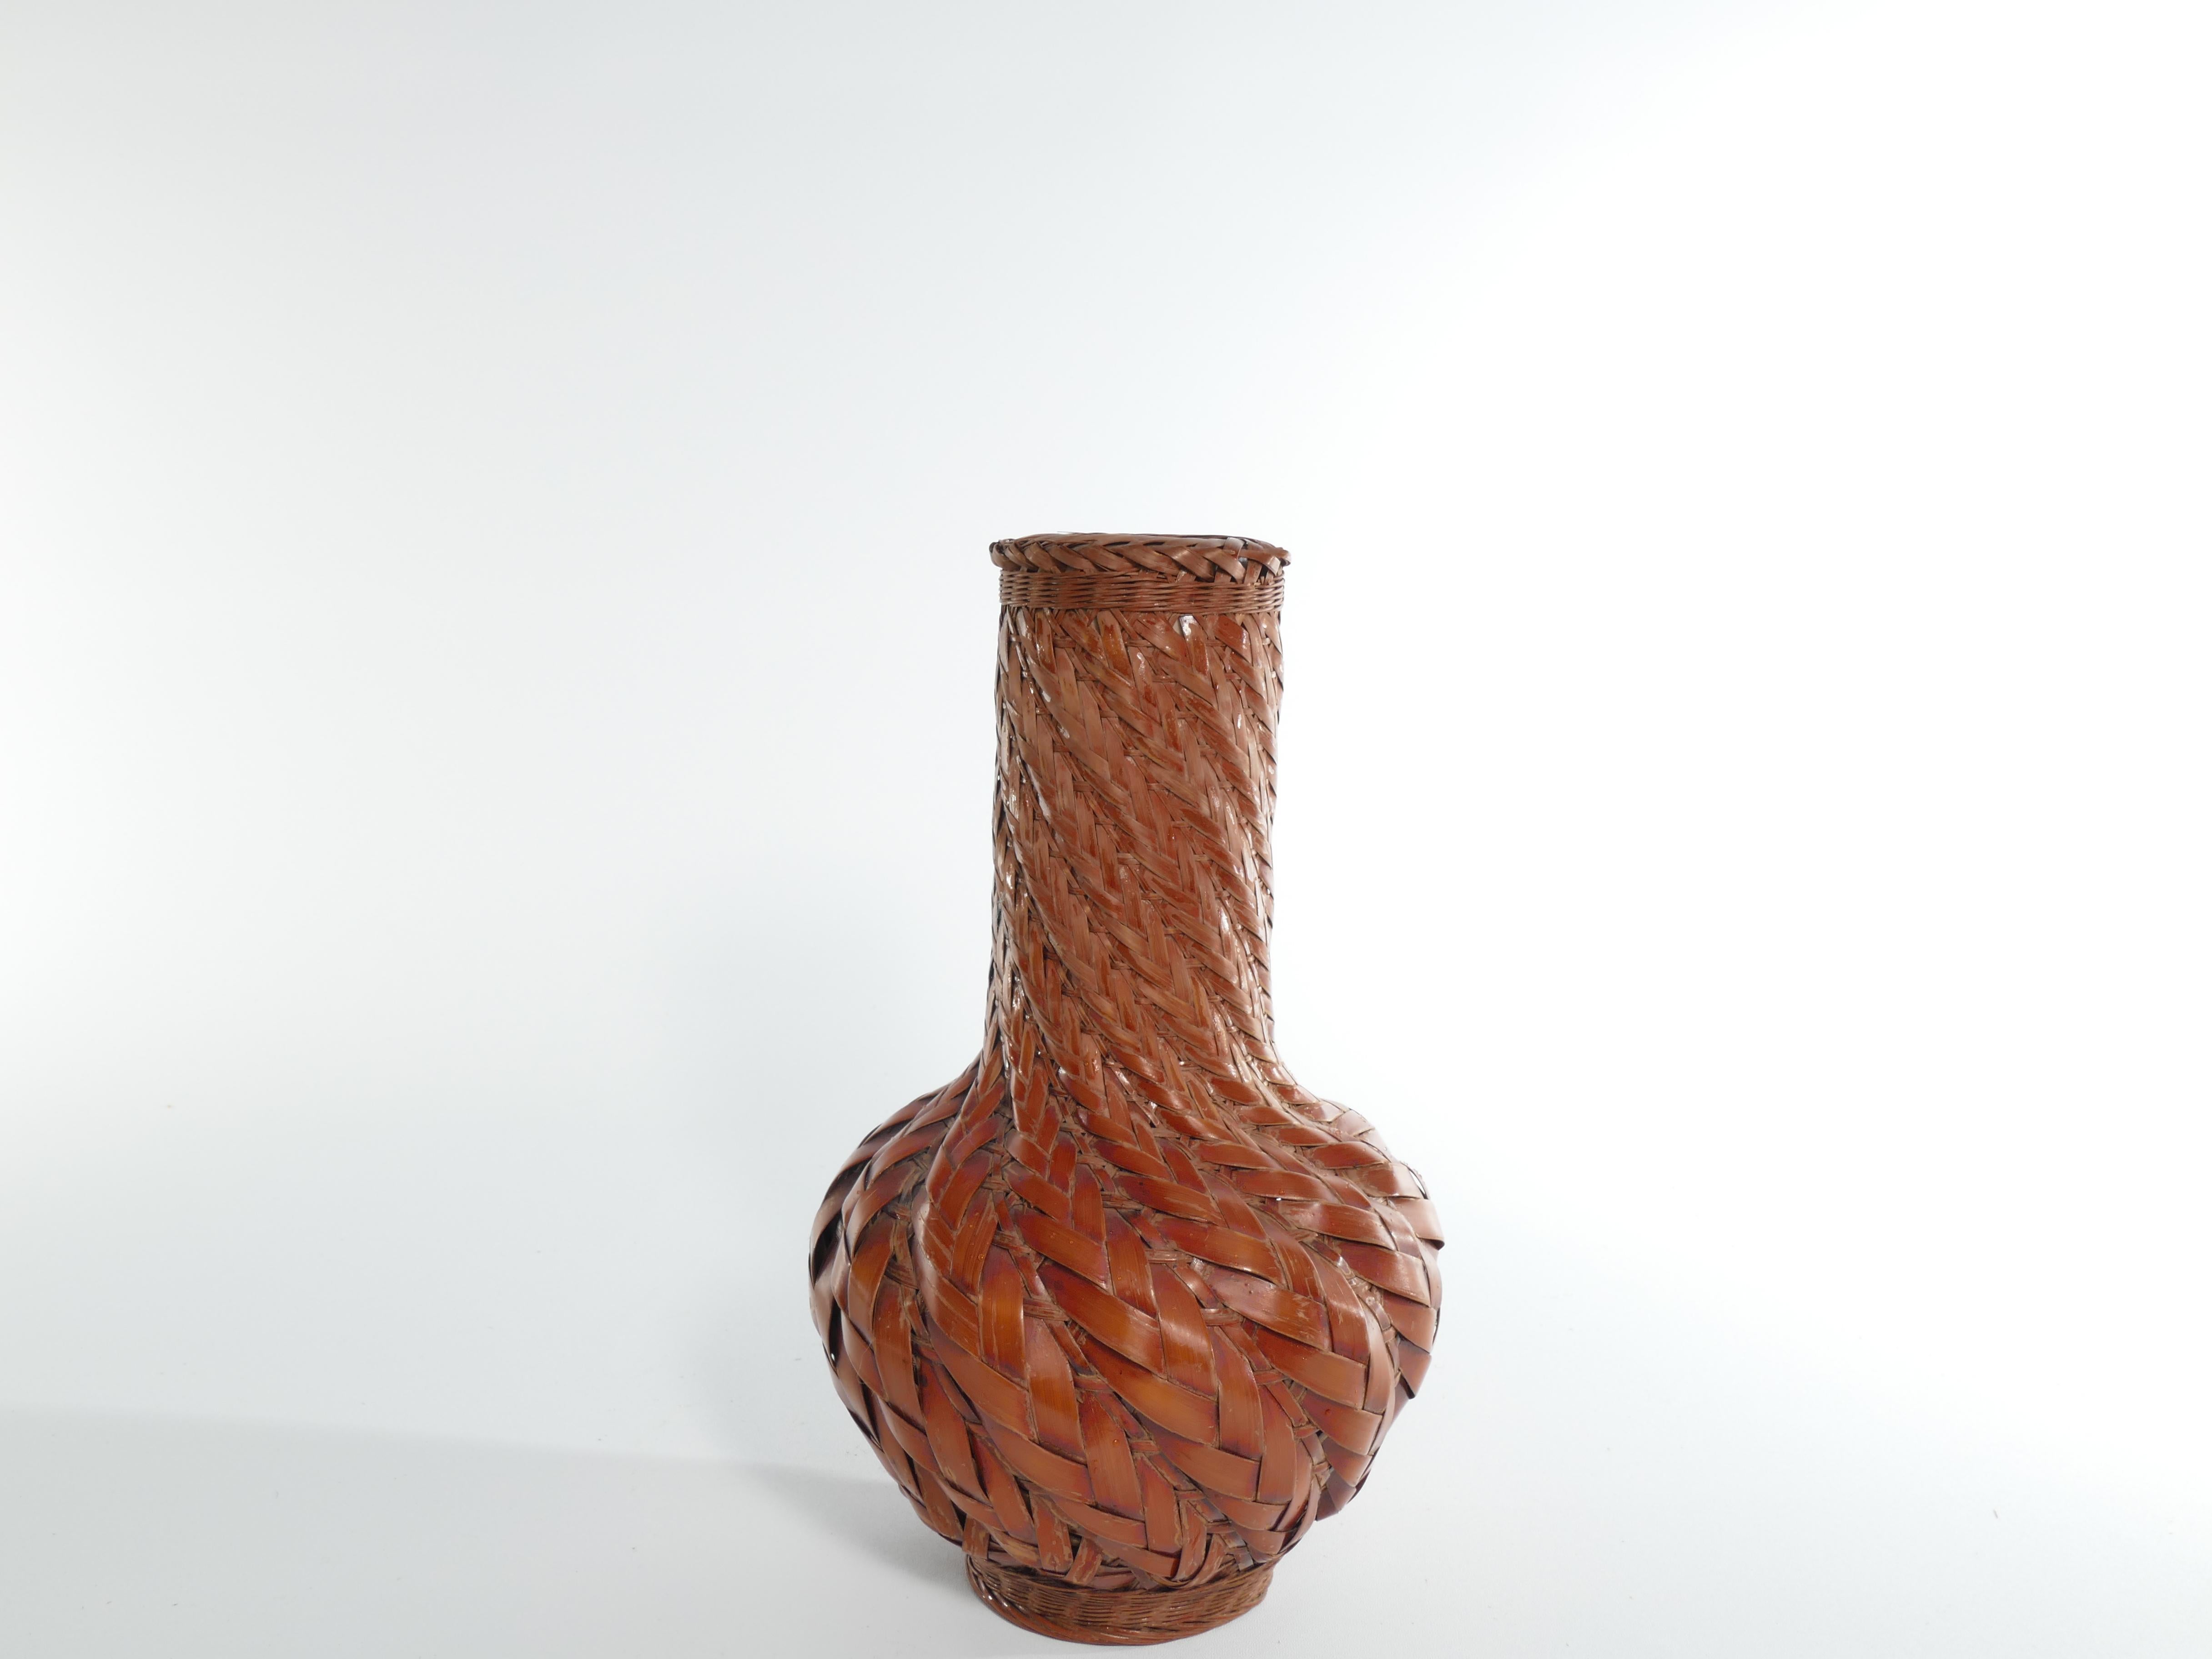 Introducing an Exquisite Early 20th Century Taisho/Showa Period Japanese Woven Bamboo Ikebana Vase – A Timeless Masterpiece!

Step into the enchanting world of Japanese craftsmanship with this Early 20th Century Taisho/Showa Period Woven Bamboo